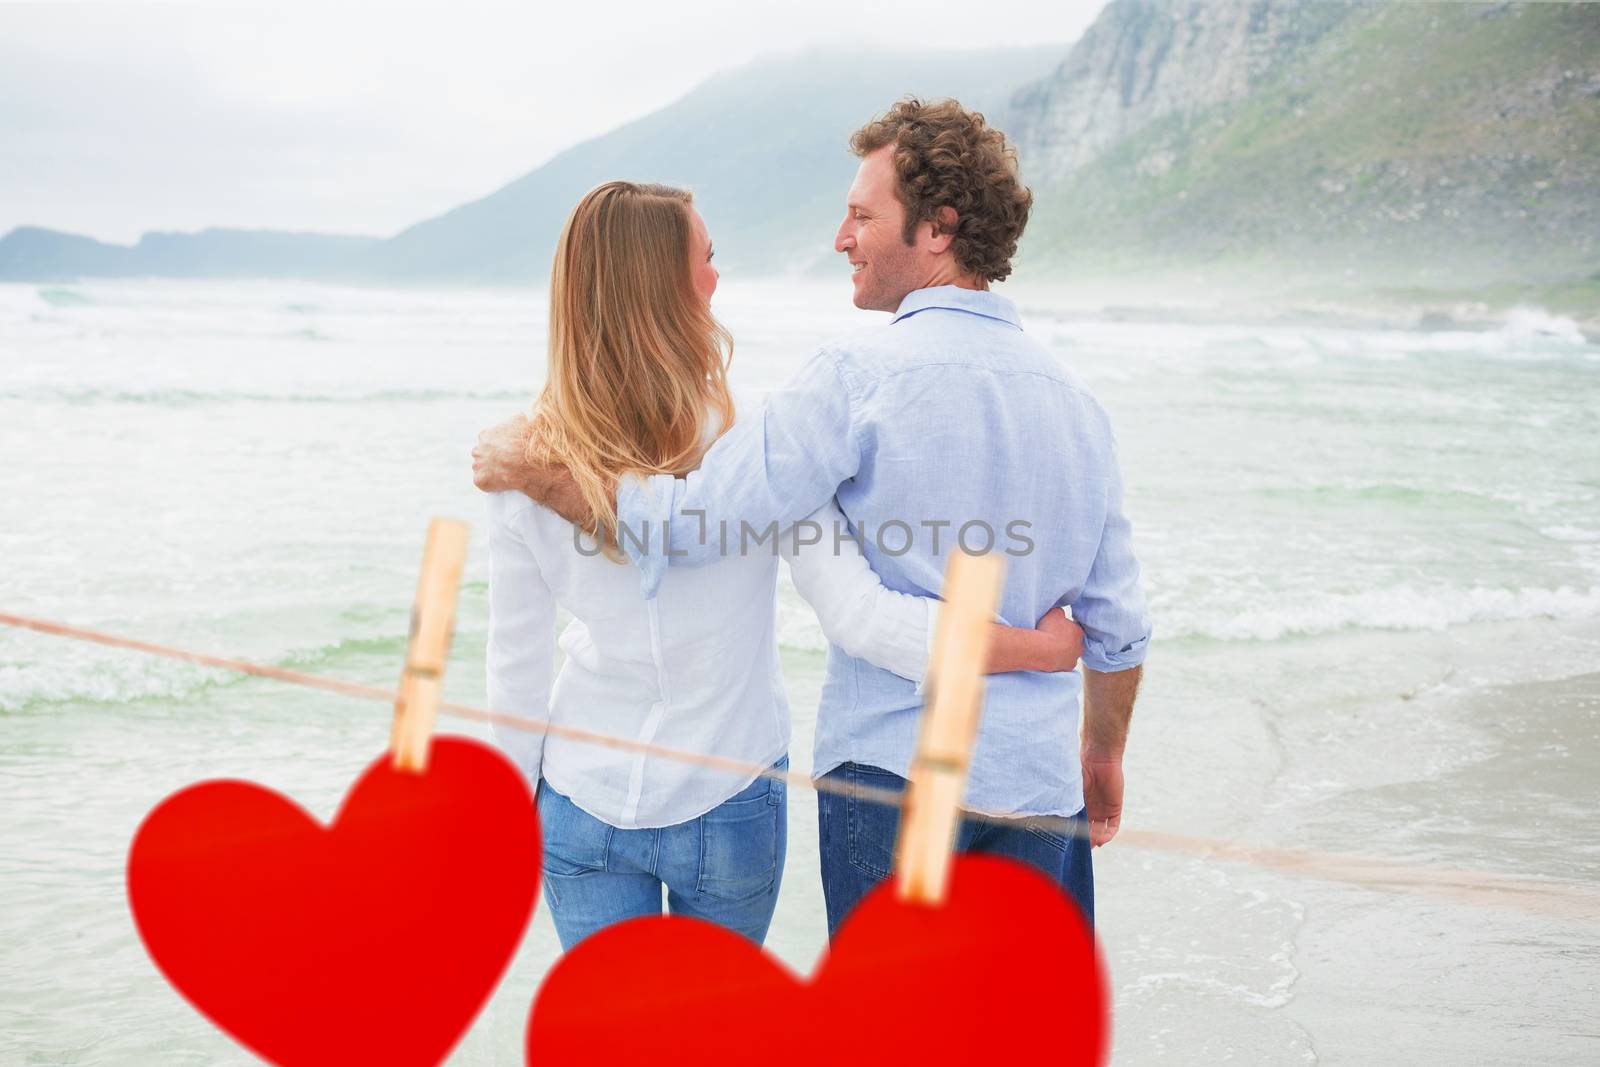 Rear view of a romantic couple at beach against hearts hanging on a line